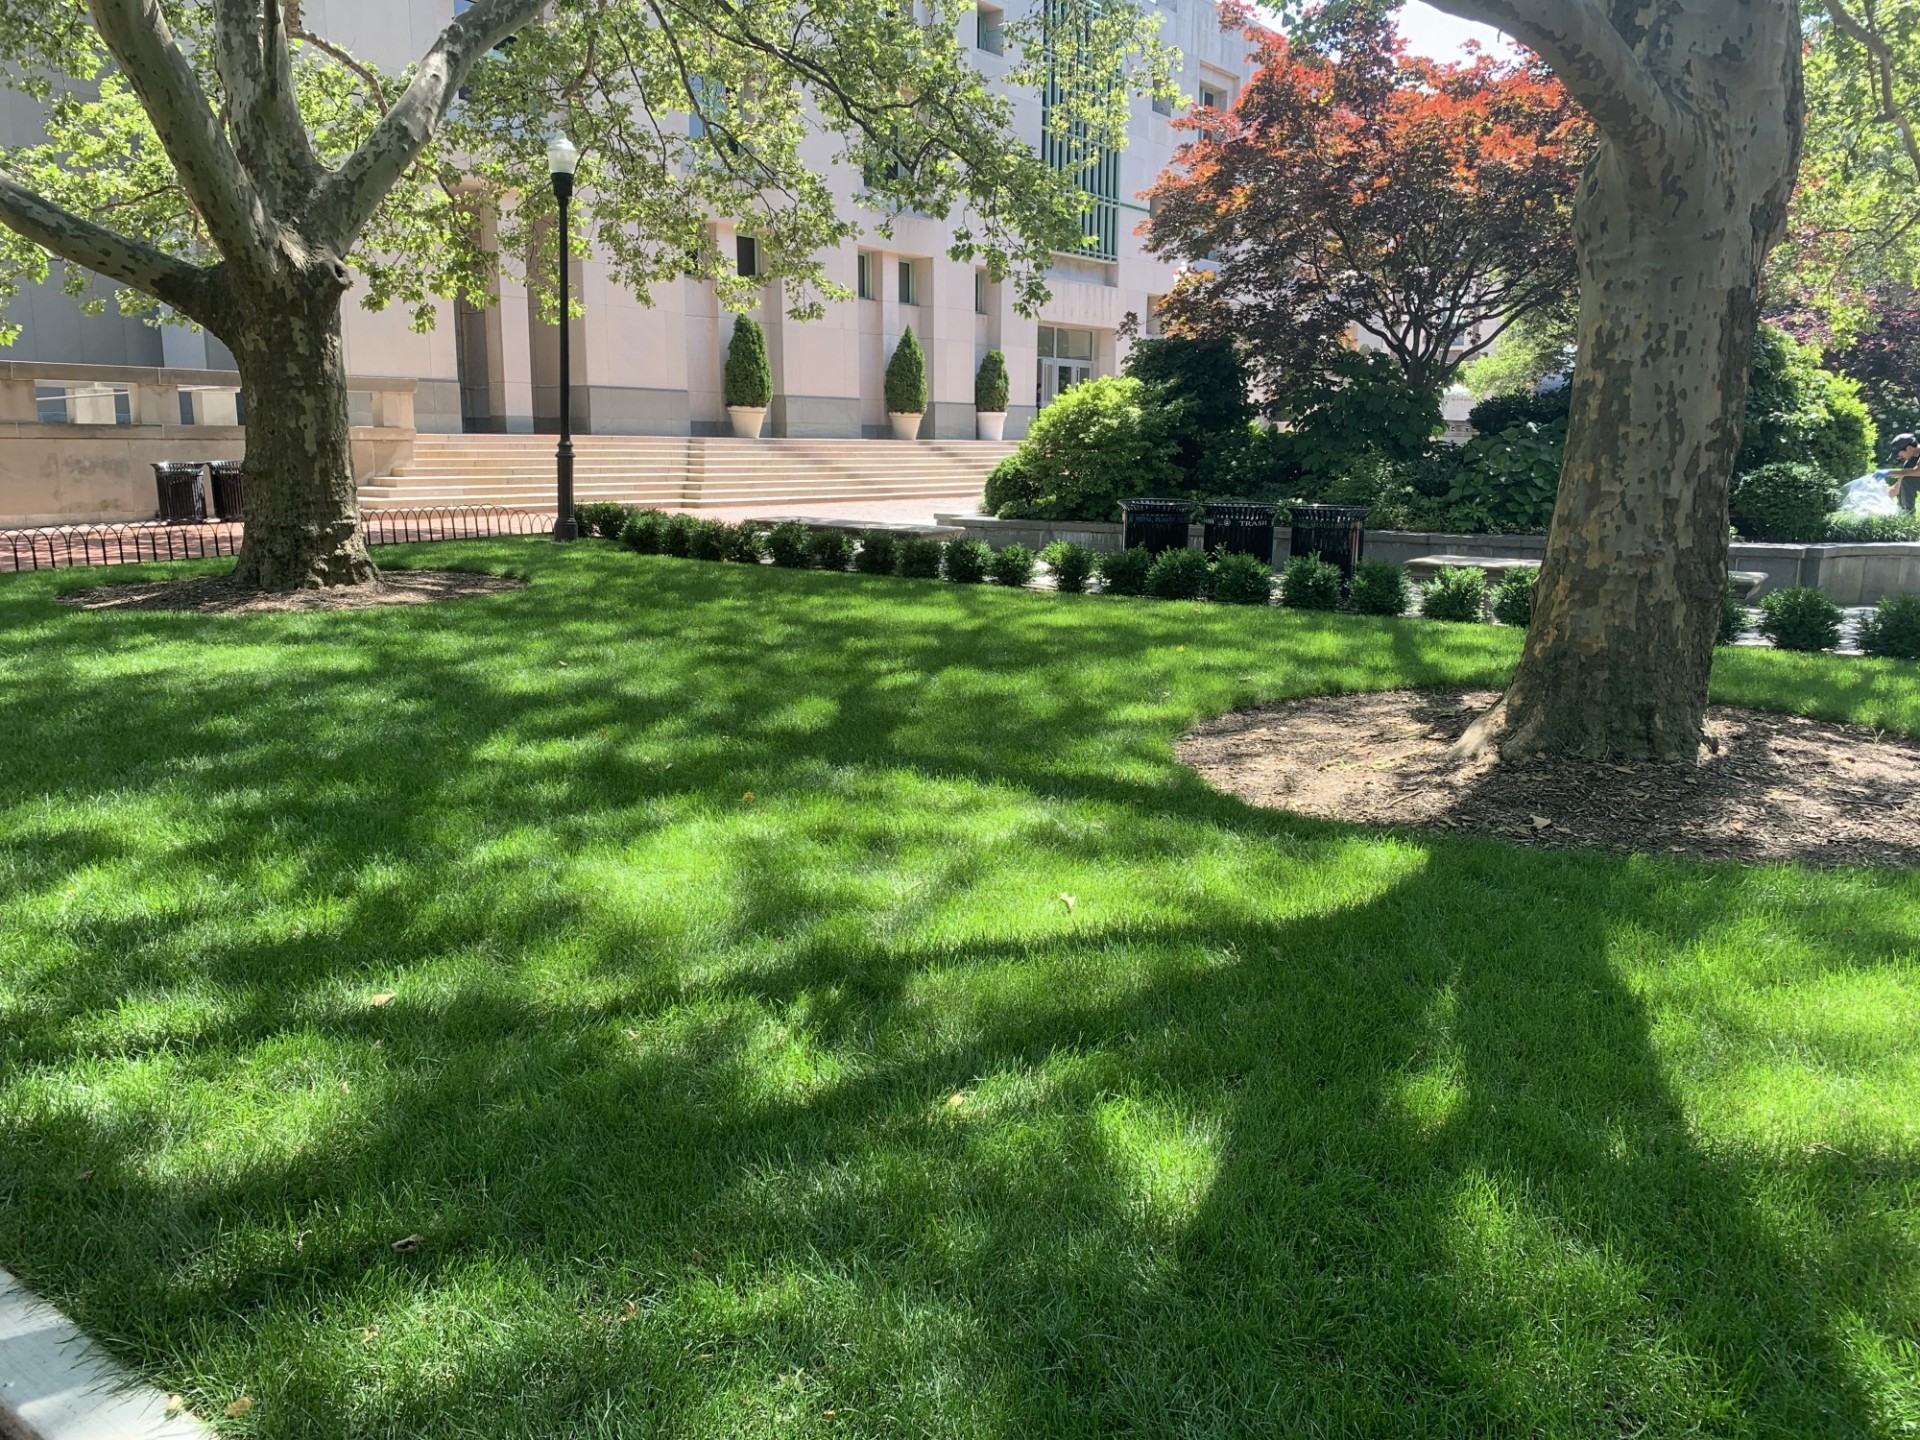 A lawn with two trees and small shrubs planted around the perimeter.